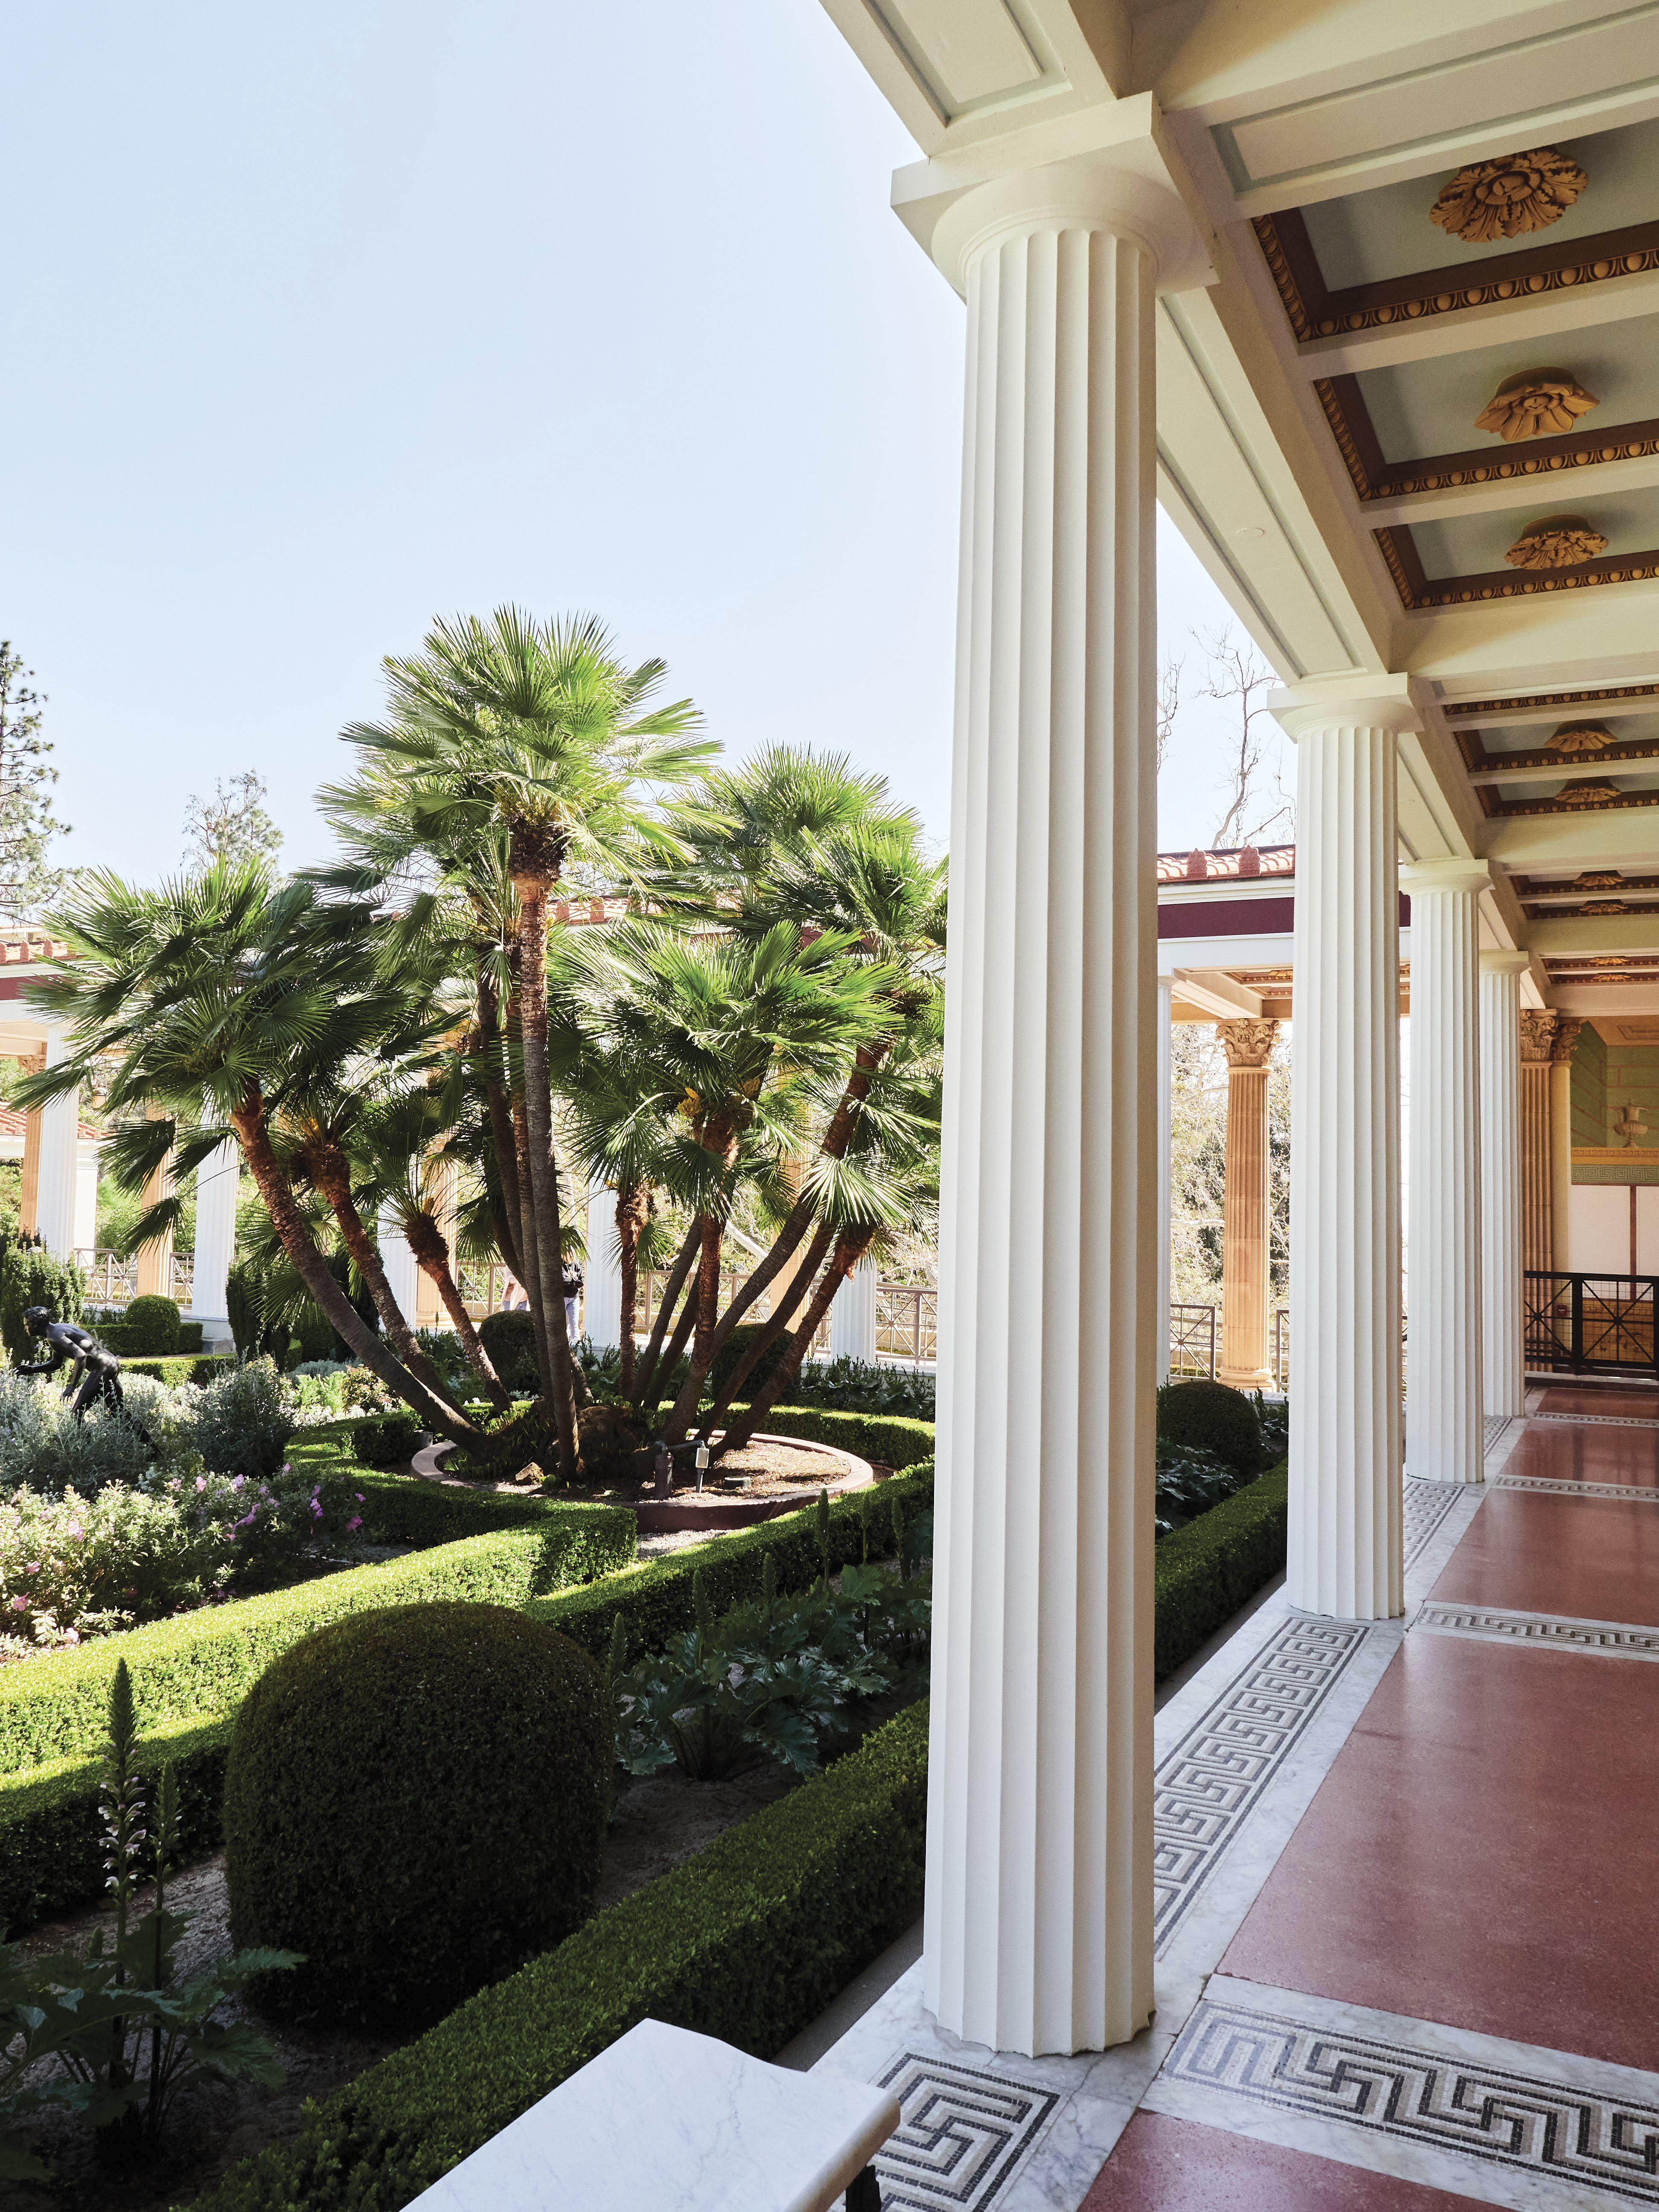 A grand peristyle overlooking the gardens.